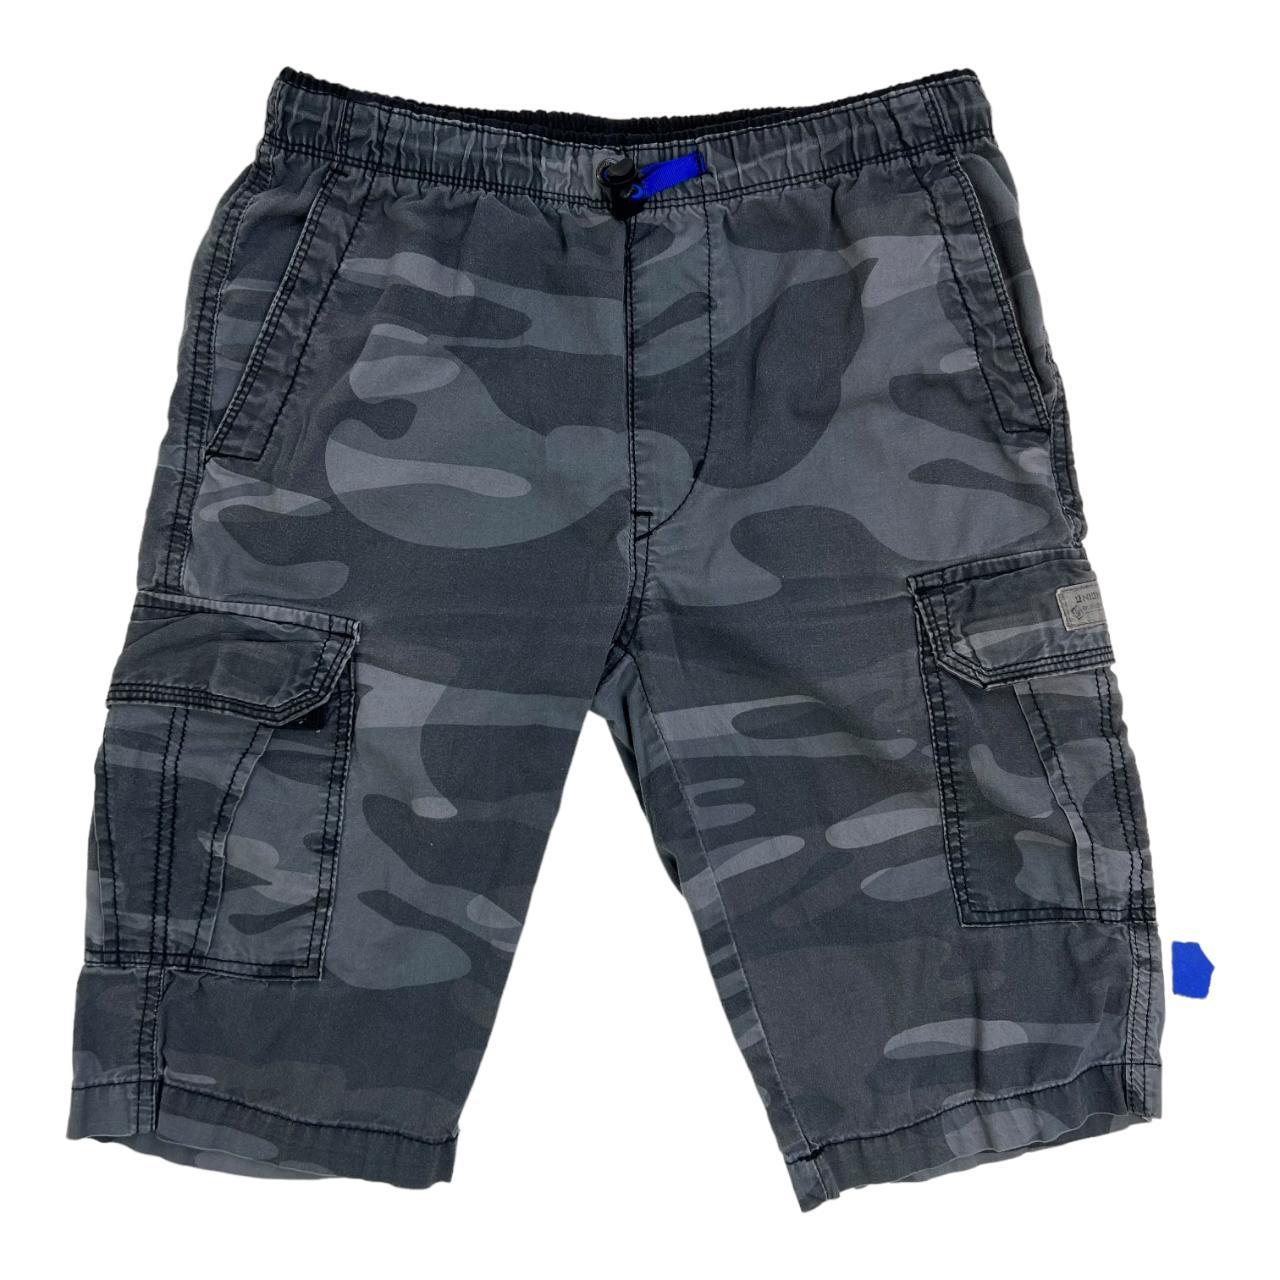 Product Image 1 - Camo Tactical Cargo Shorts

A pair